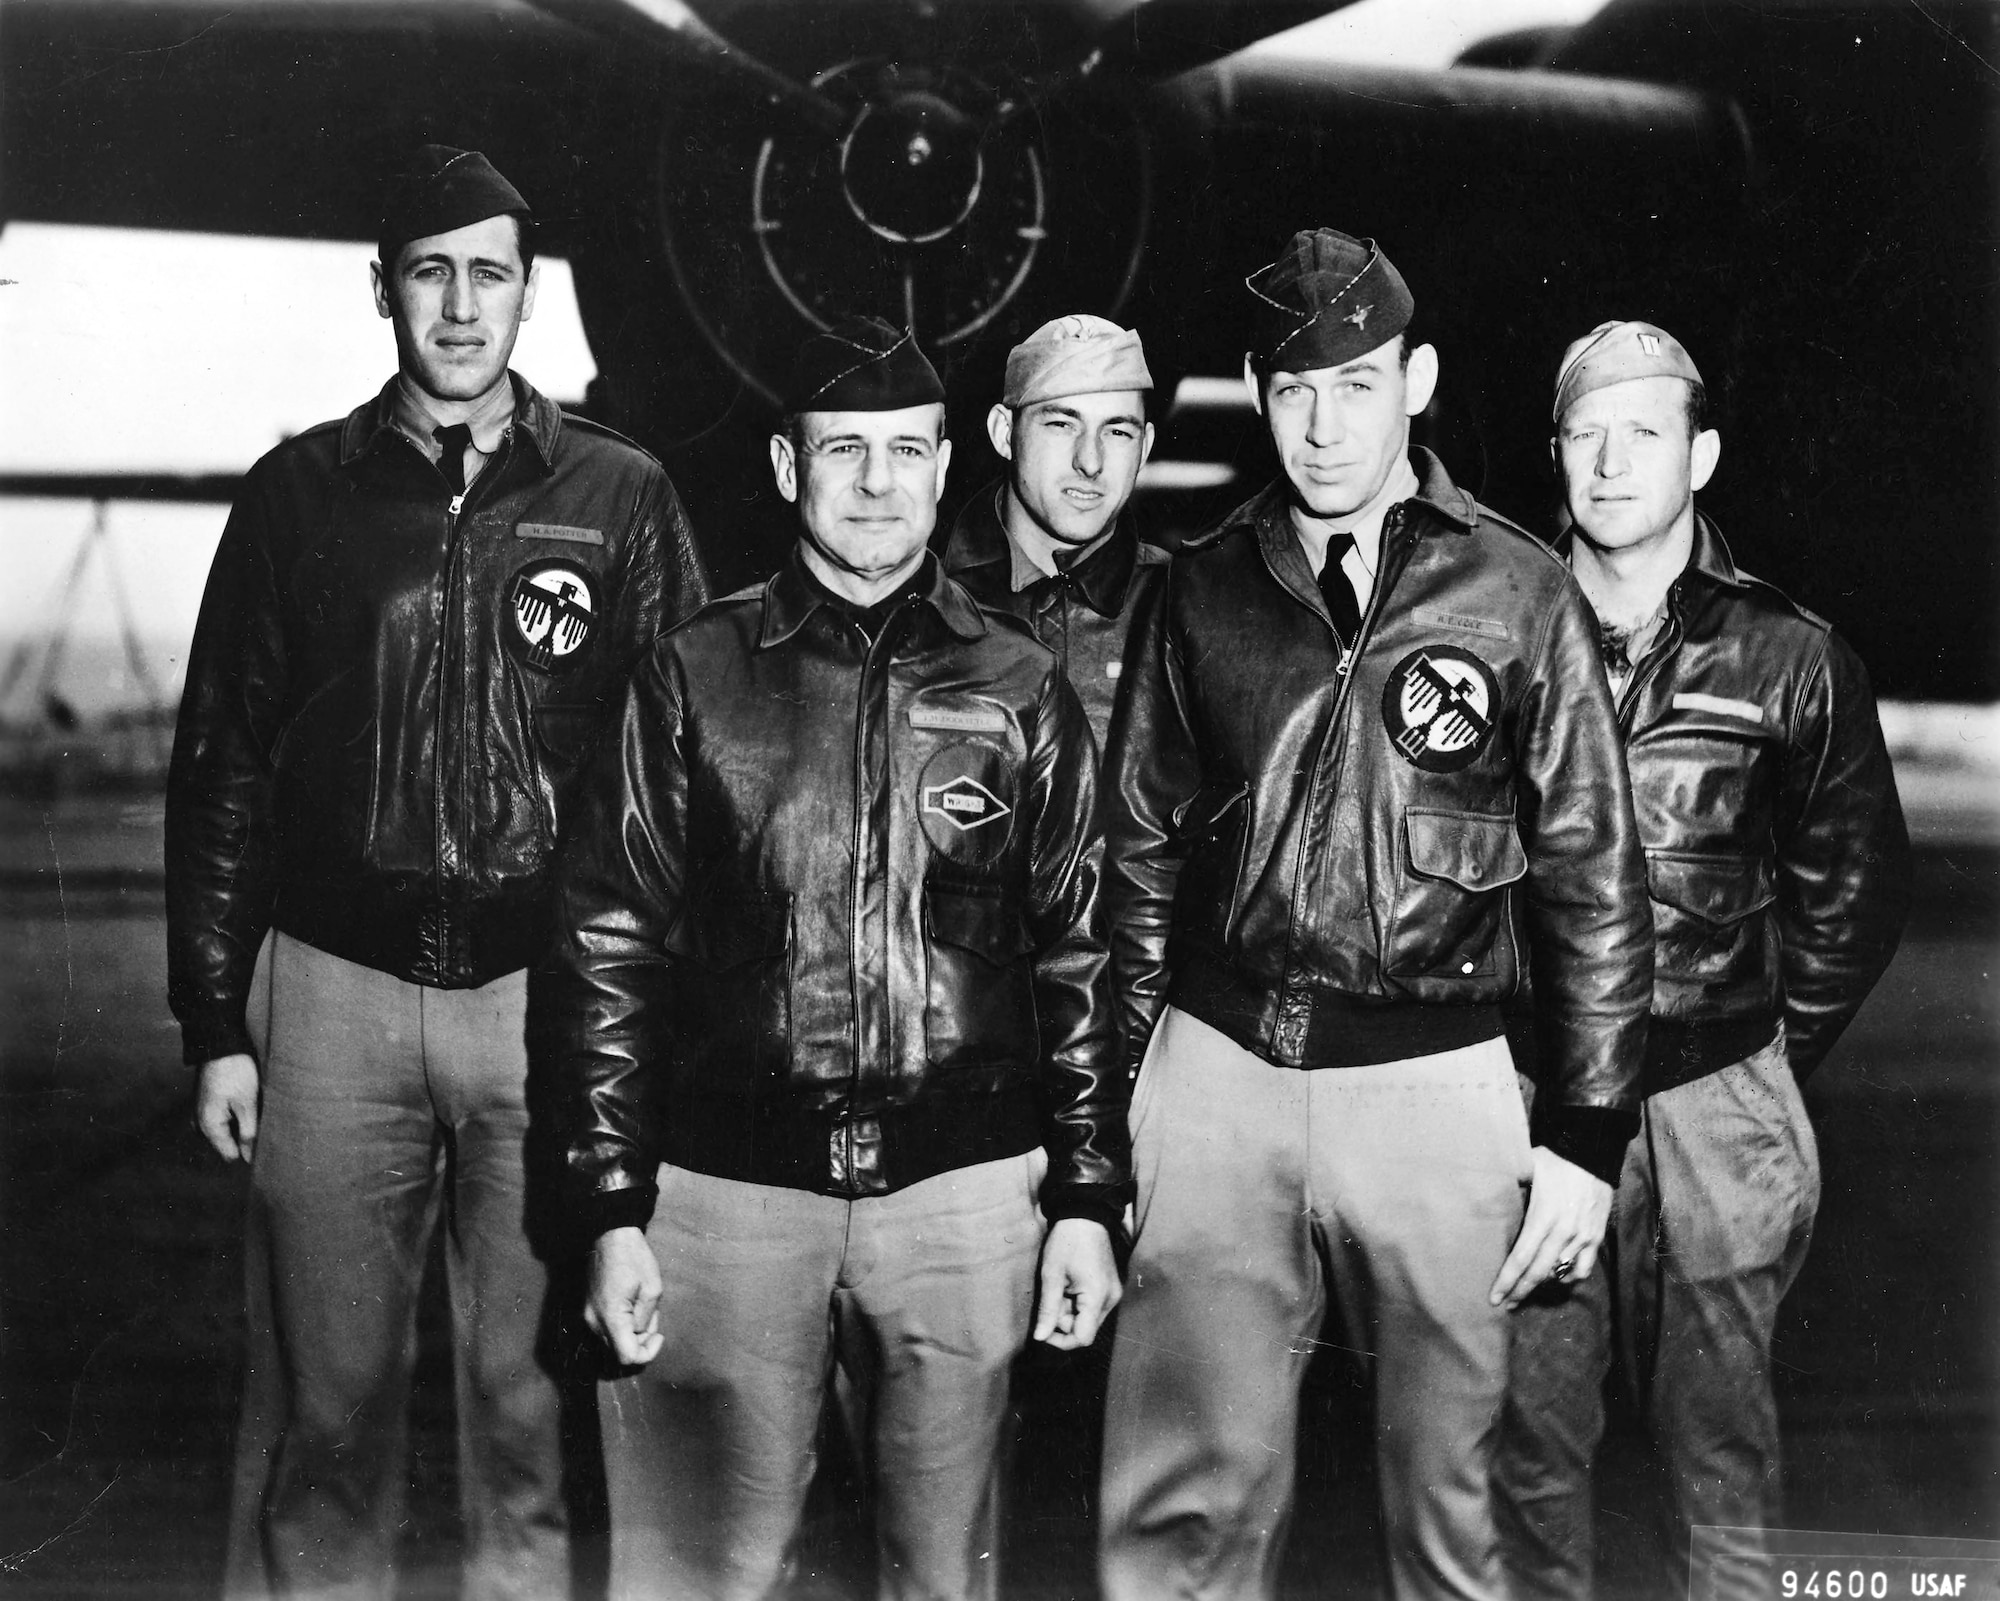 The Doolittle Raiders Crew No. 1 pose in front of a B-25 Mitchell on the USS Hornet. The Doolittle Raiders were the inspiration in the naming of the newest Air Force bomber—the B-21 Raider. (Courtesy photo)

